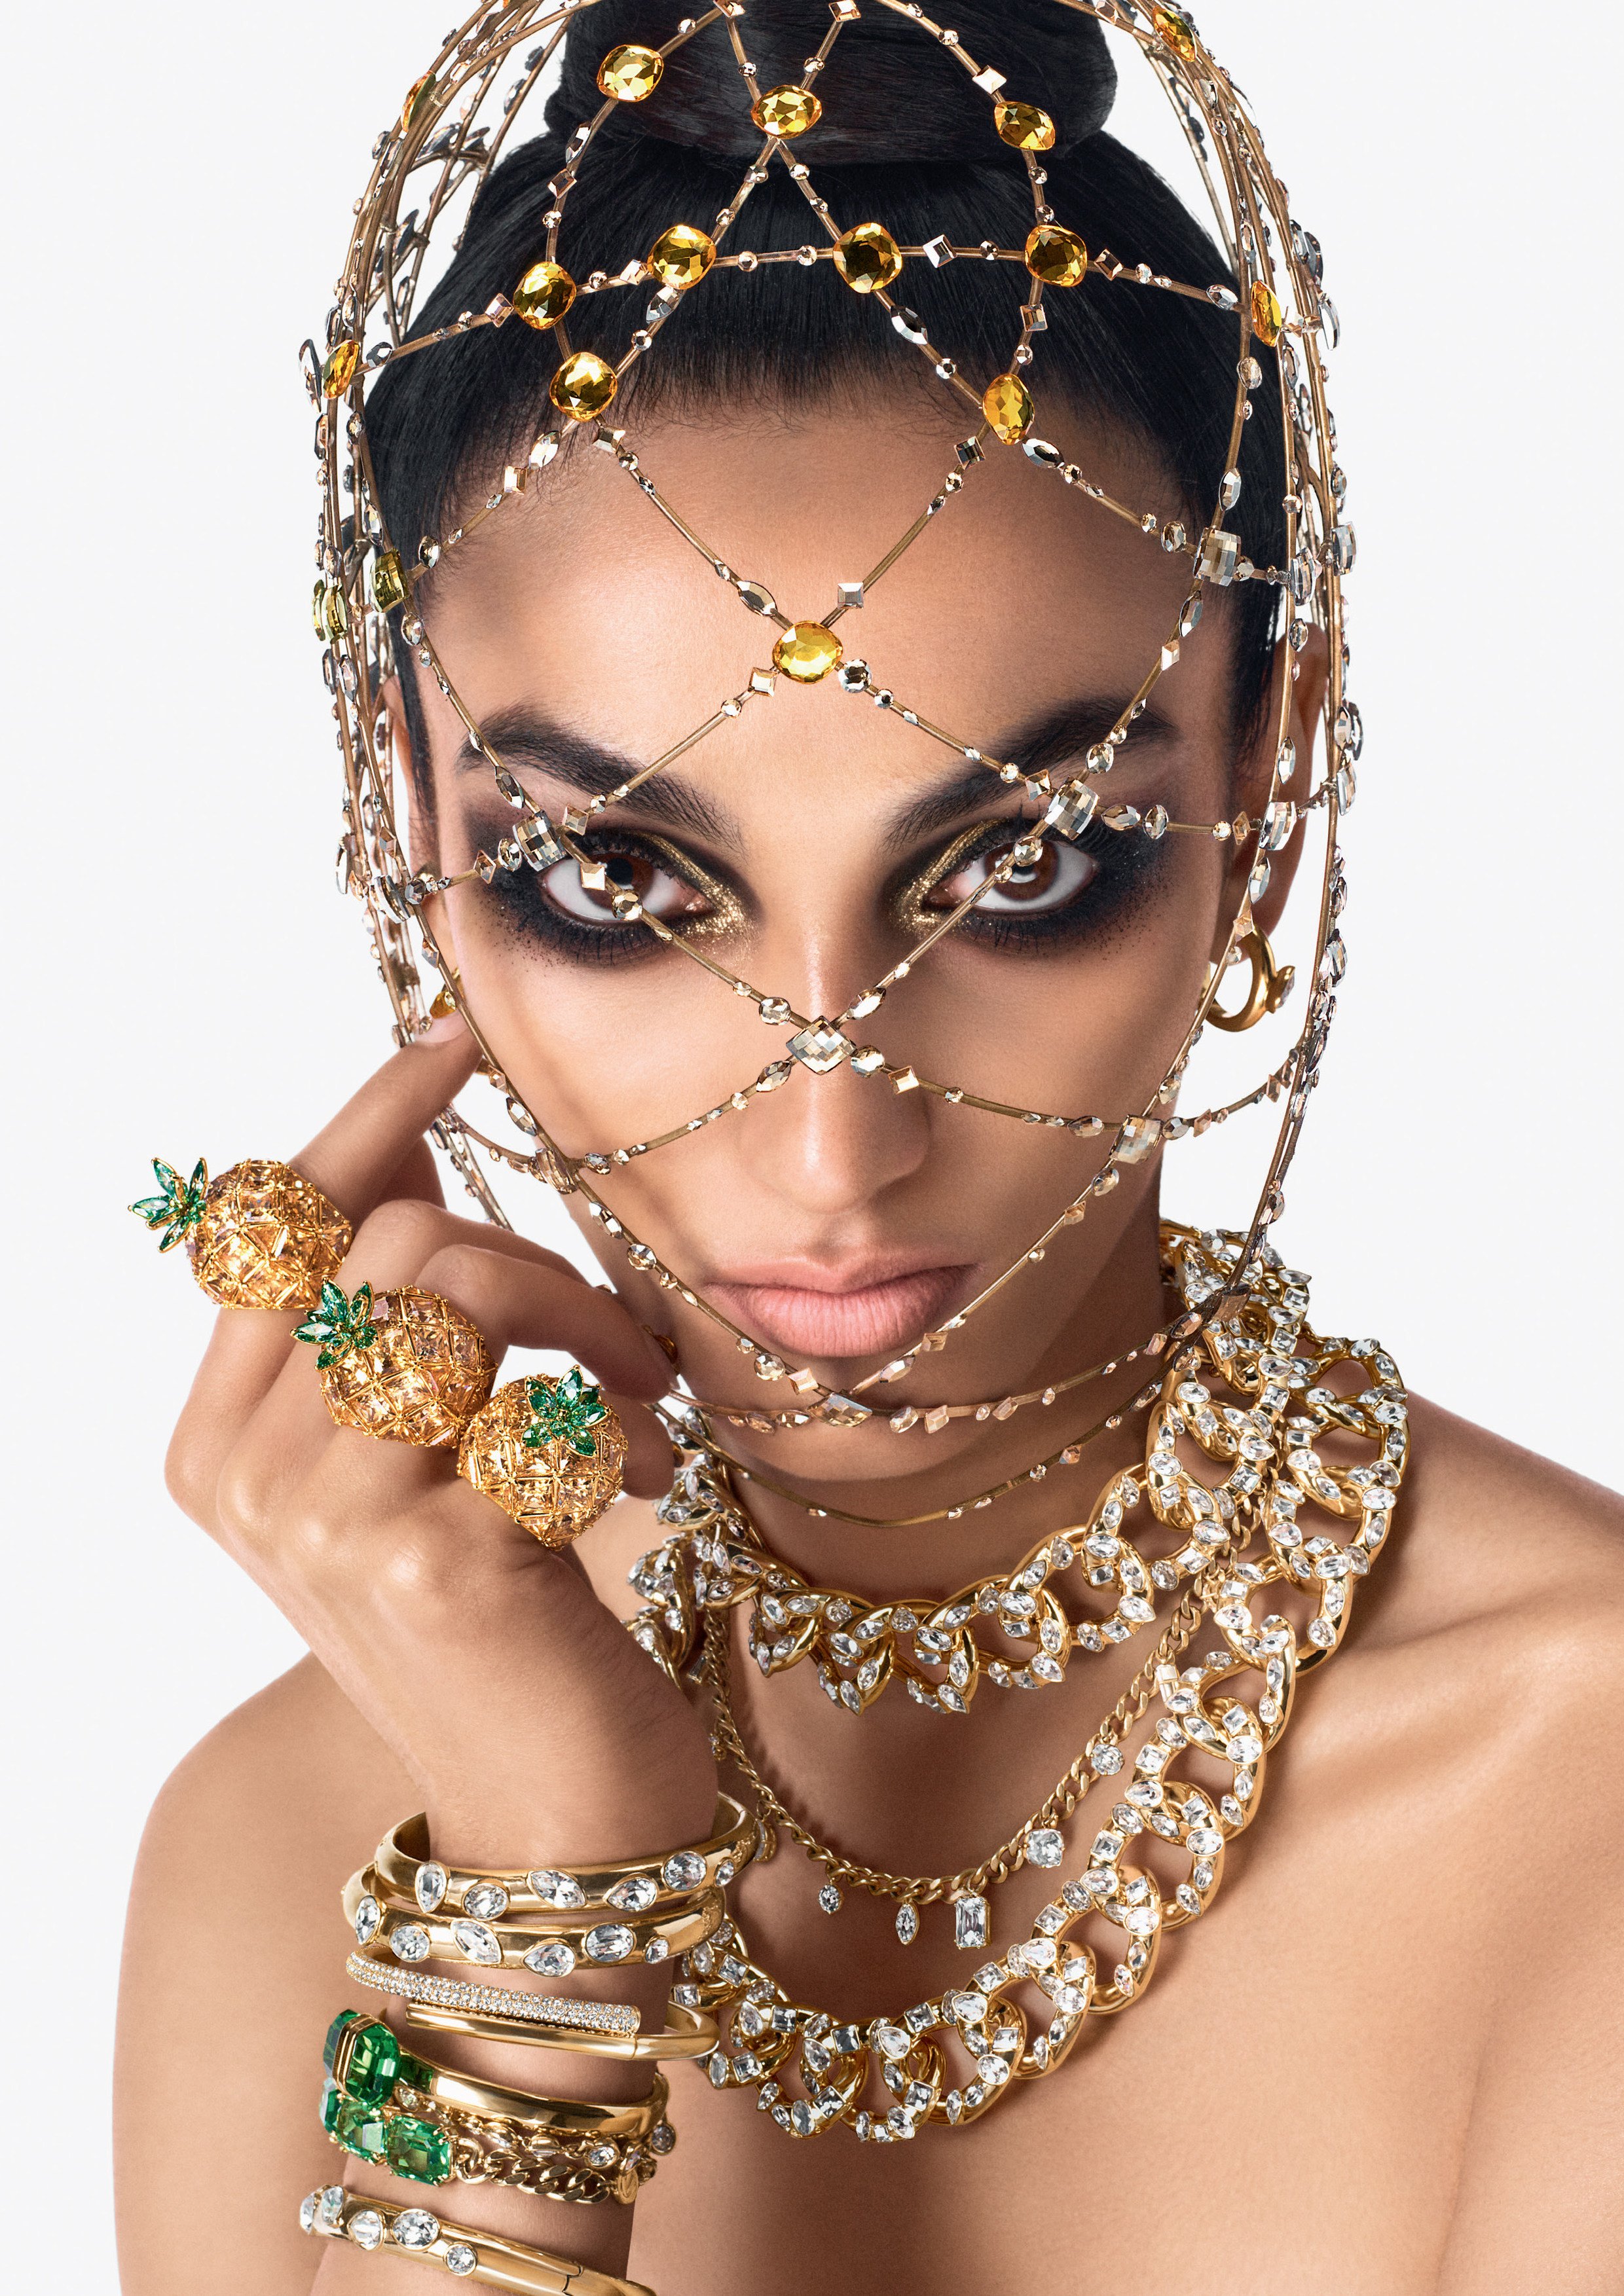 6 brands doing summer in style: Chopard, Swarovski, Maison Margiela, Paco Rabanne and The Vampire’s Wife all have seasonal looks, bags or jewellery we can’t get enough of. Photo: Swarovski